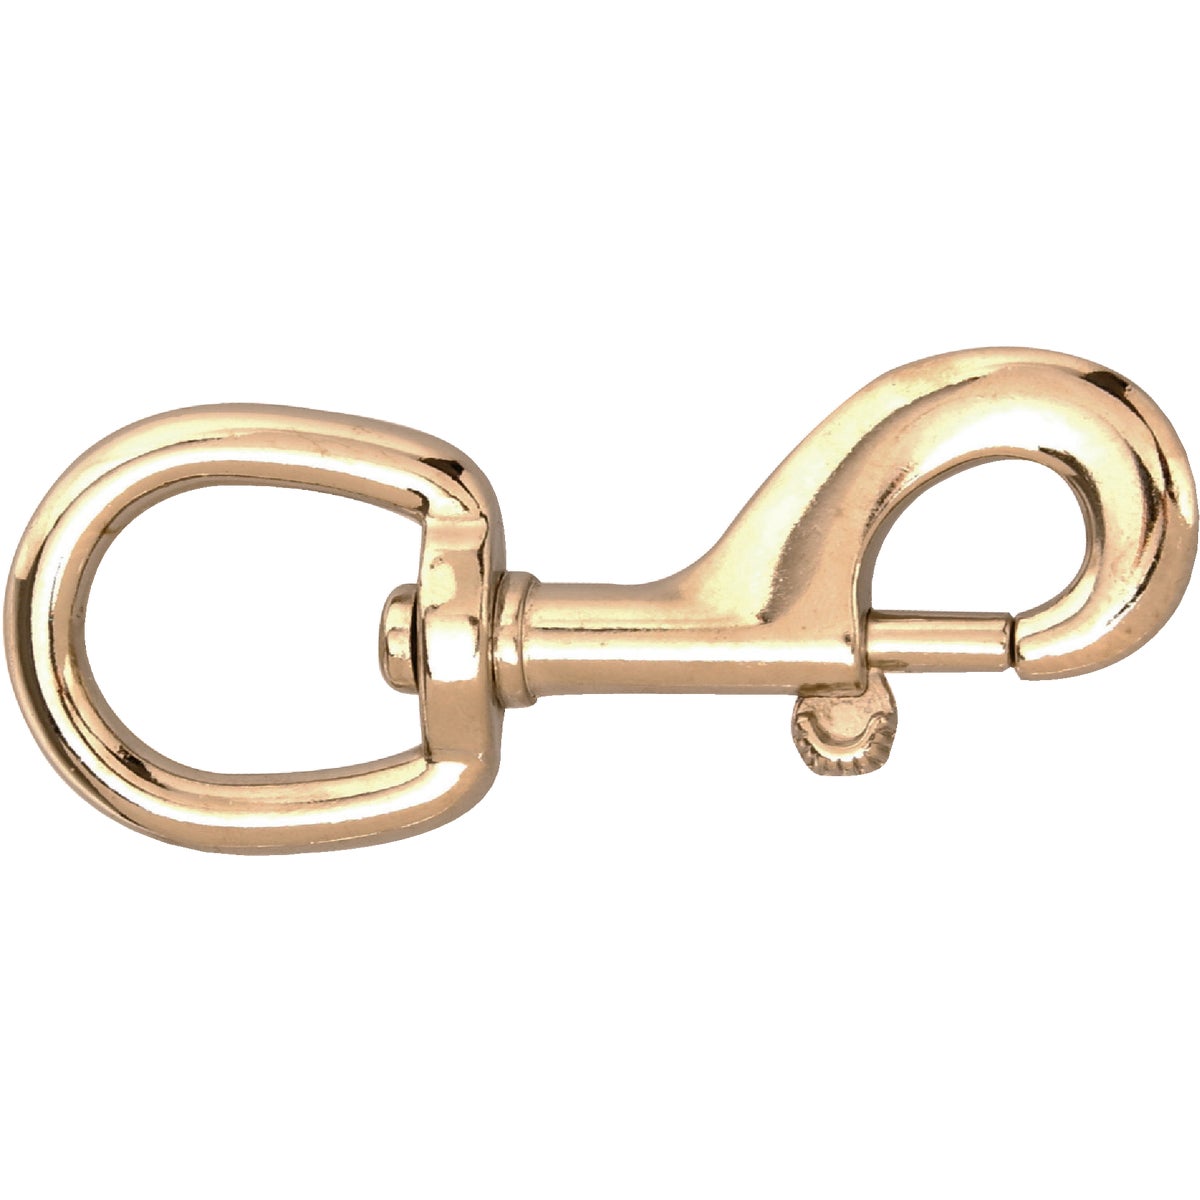 Item 701379, Nickel-plated cast malleable iron. Long body, snap (takes 5/8" rope).